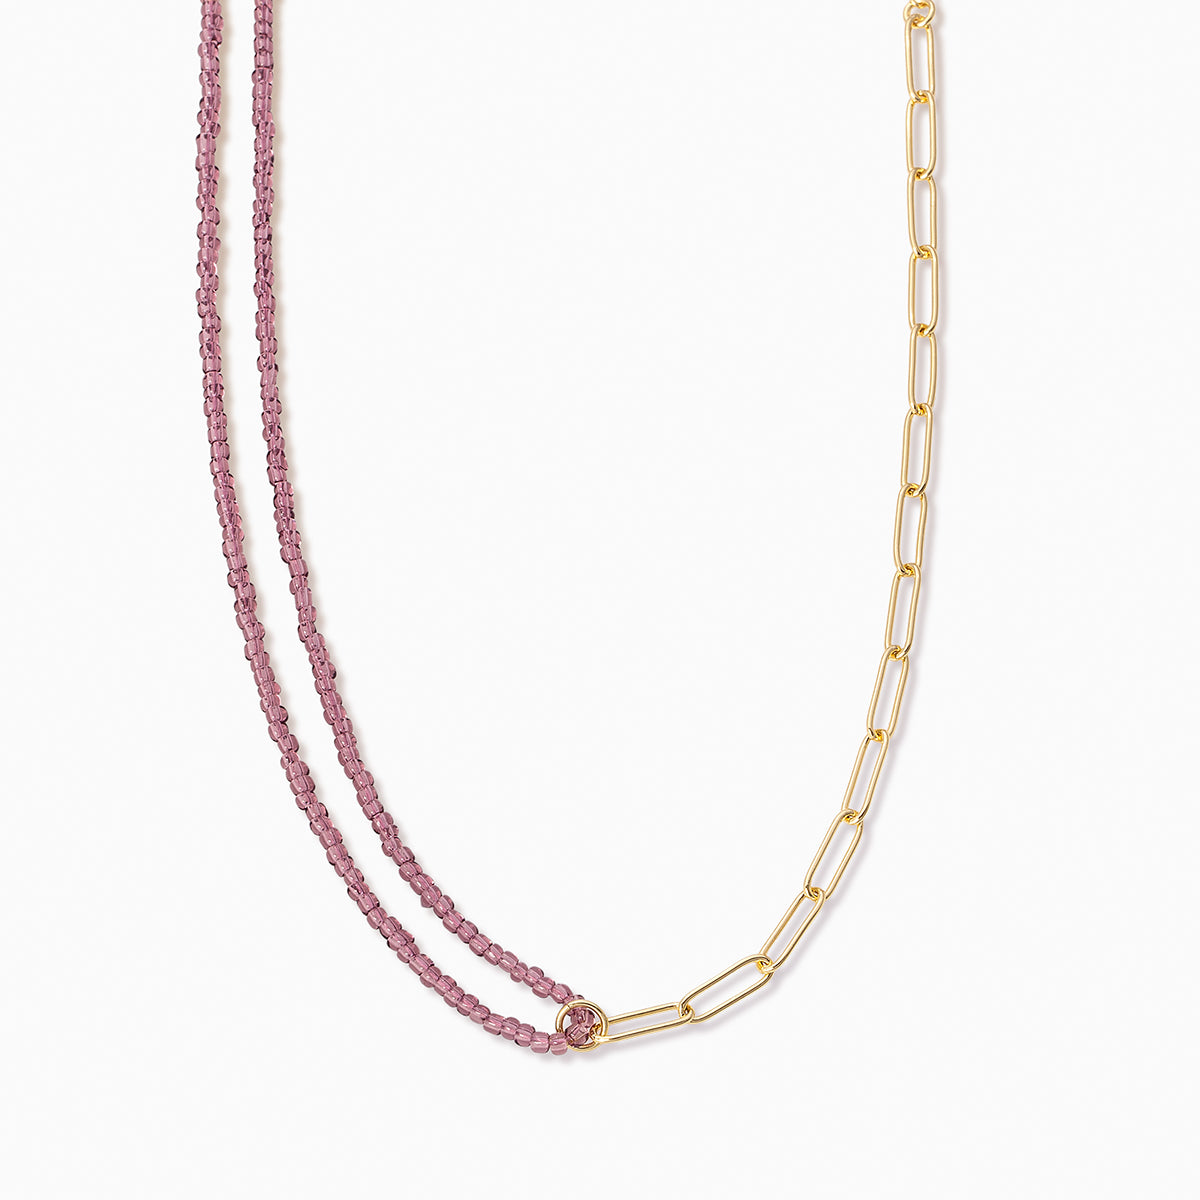 Bead and Chain Necklace | Gold | Product Image | Uncommon James